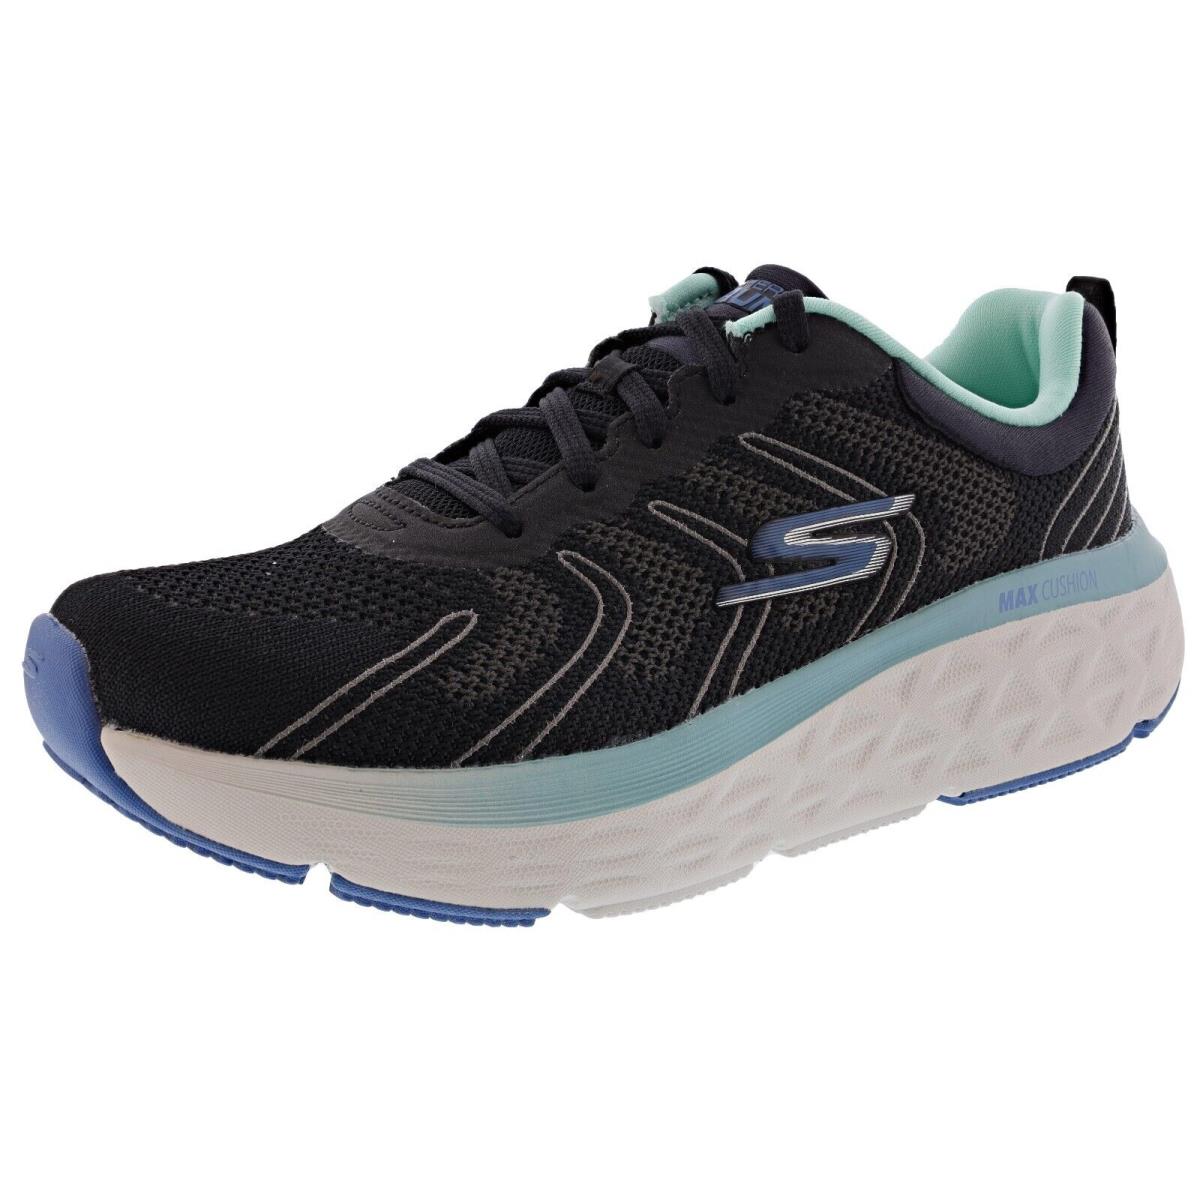 Skechers Women`s Max Cushioning Delta - 129120BKBL Lace-up Running Shoes